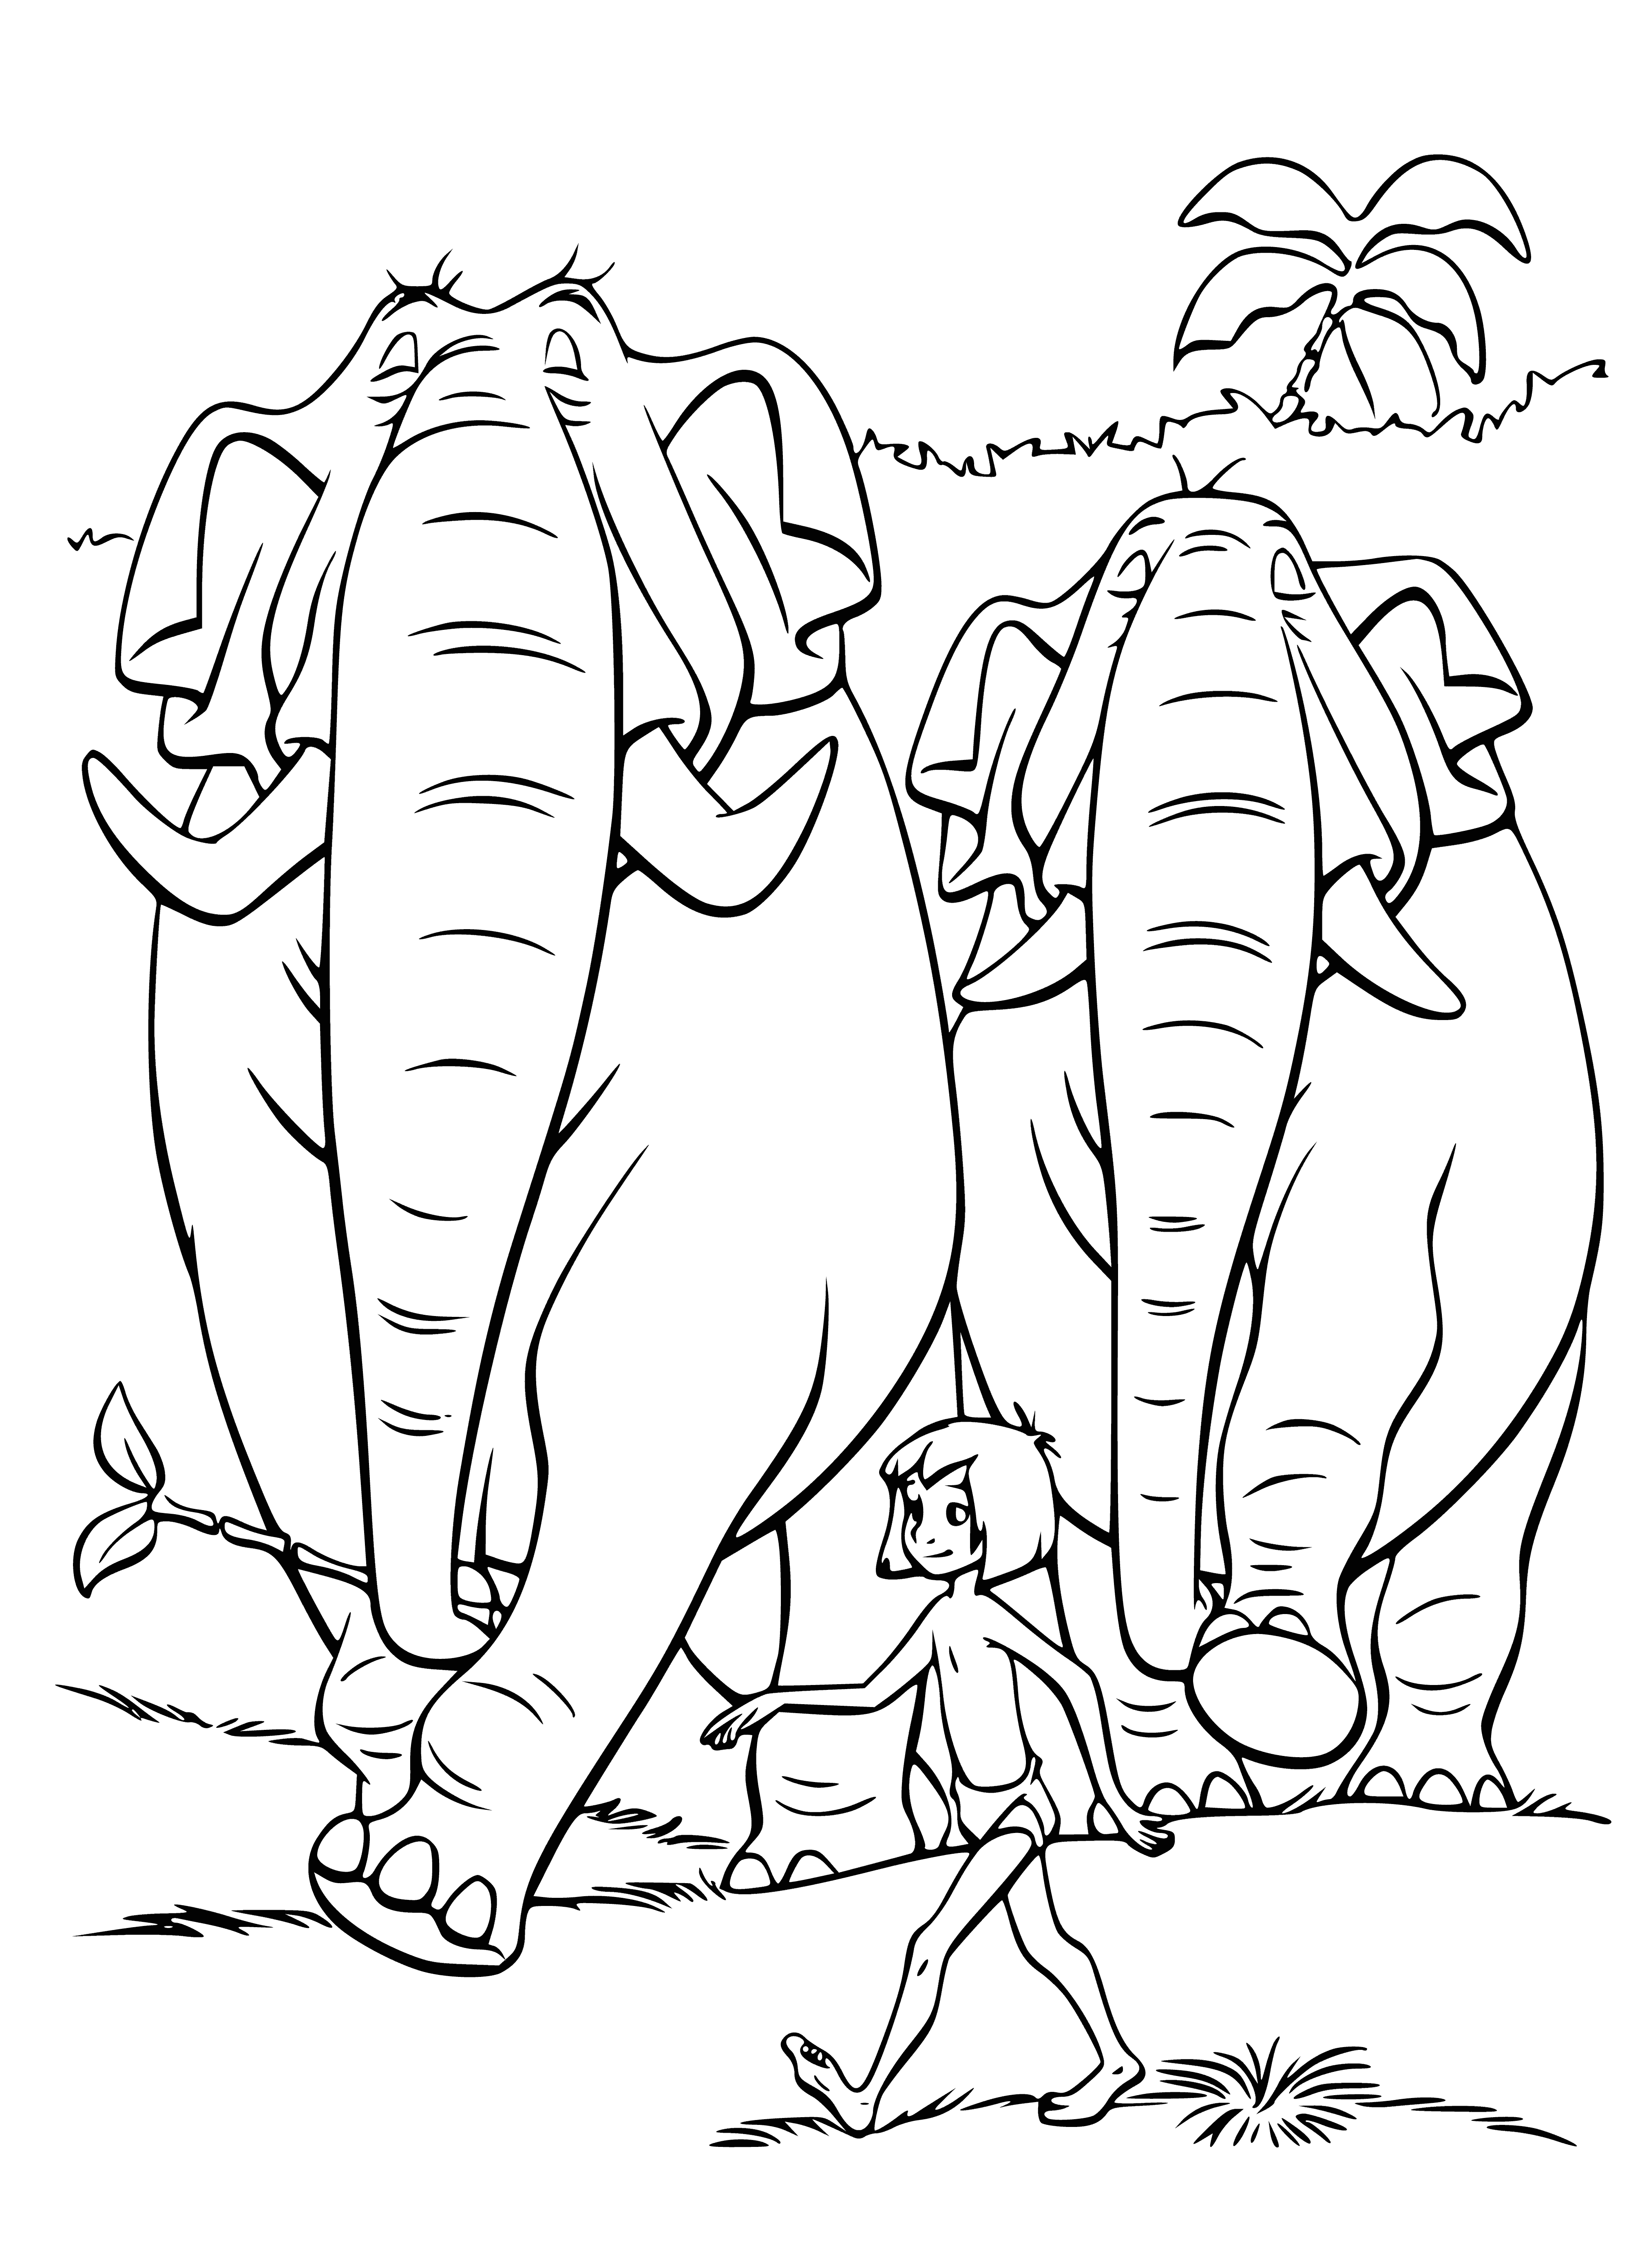 coloring page: Mowgli is walking with a herd of elephants in the jungle, wearing a loincloth and holding on to an elephant's trunk with a knife in his belt. His wild hair and big grin show his excitement.